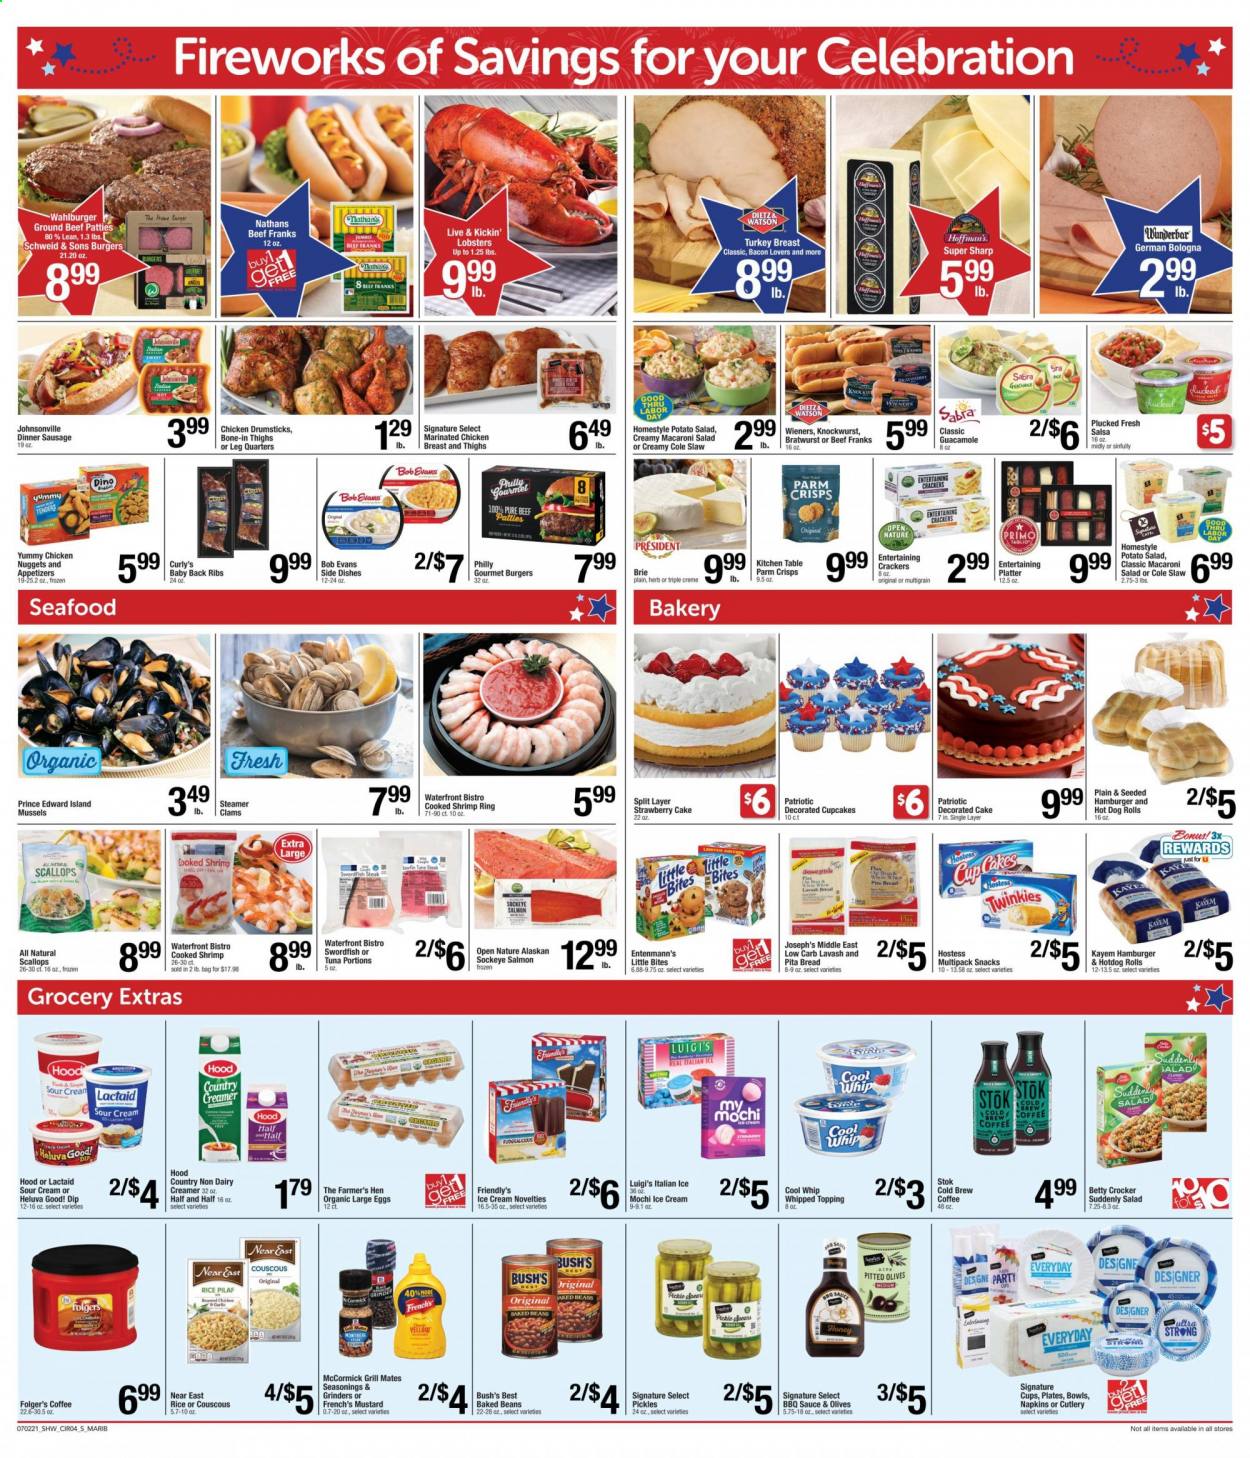 thumbnail - Shaw’s Flyer - 07/02/2021 - 07/08/2021 - Sales products - bread, hot dog rolls, pita, cupcake, Entenmann's, onion, pears, clams, lobster, mussels, salmon, scallops, swordfish, tuna, seafood, shrimps, nuggets, hamburger, chicken nuggets, Bob Evans, bacon, Johnsonville, german bologna, bratwurst, sausage, guacamole, potato salad, macaroni salad, Lactaid, brie, large eggs, Cool Whip, sour cream, non dairy creamer, creamer, dip, ice cream, Friendly's Ice Cream, snack, Celebration, crackers, Little Bites, topping, tuna steak, pickles, olives, baked beans, couscous, herbs, BBQ sauce, mustard, salsa, honey, coffee, Folgers, turkey breast, chicken breasts, chicken drumsticks, marinated chicken, beef meat, ground beef, steak, pork meat, pork ribs, pork back ribs, napkins, Plax, plate, Sharp, Half and half. Page 4.